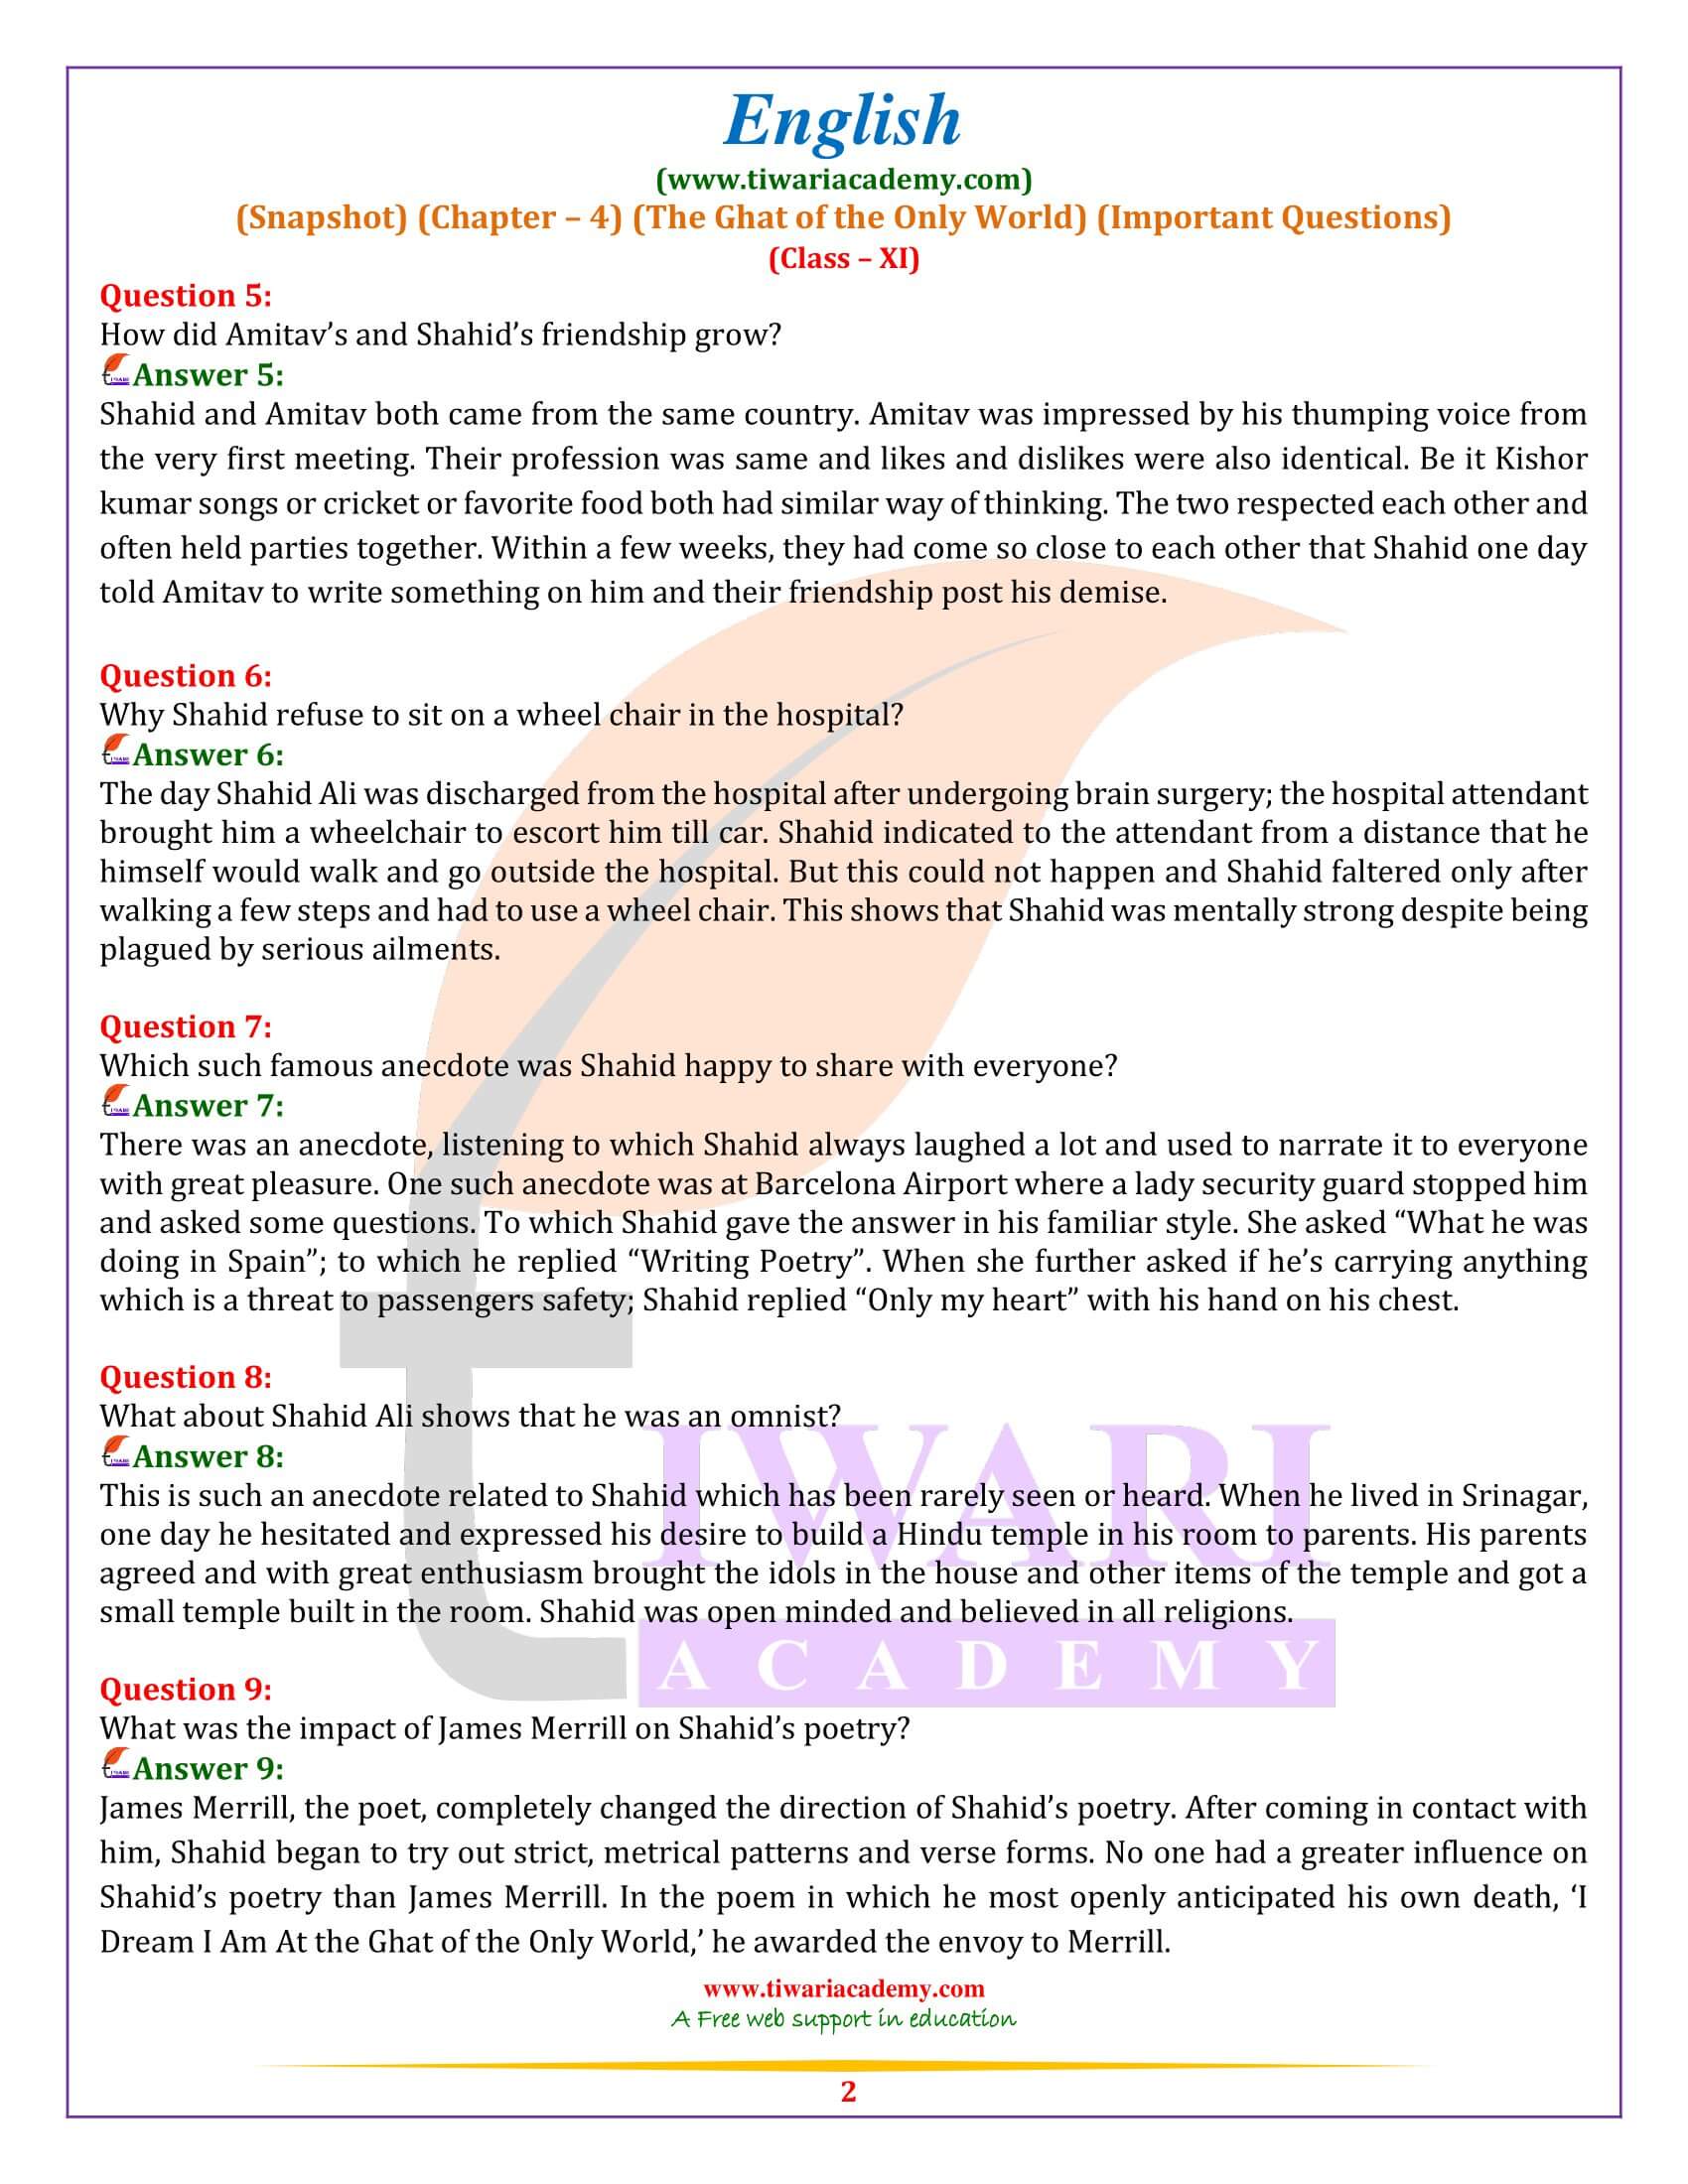 Class 11 English Snapshots Chapter 4 Extra Questions